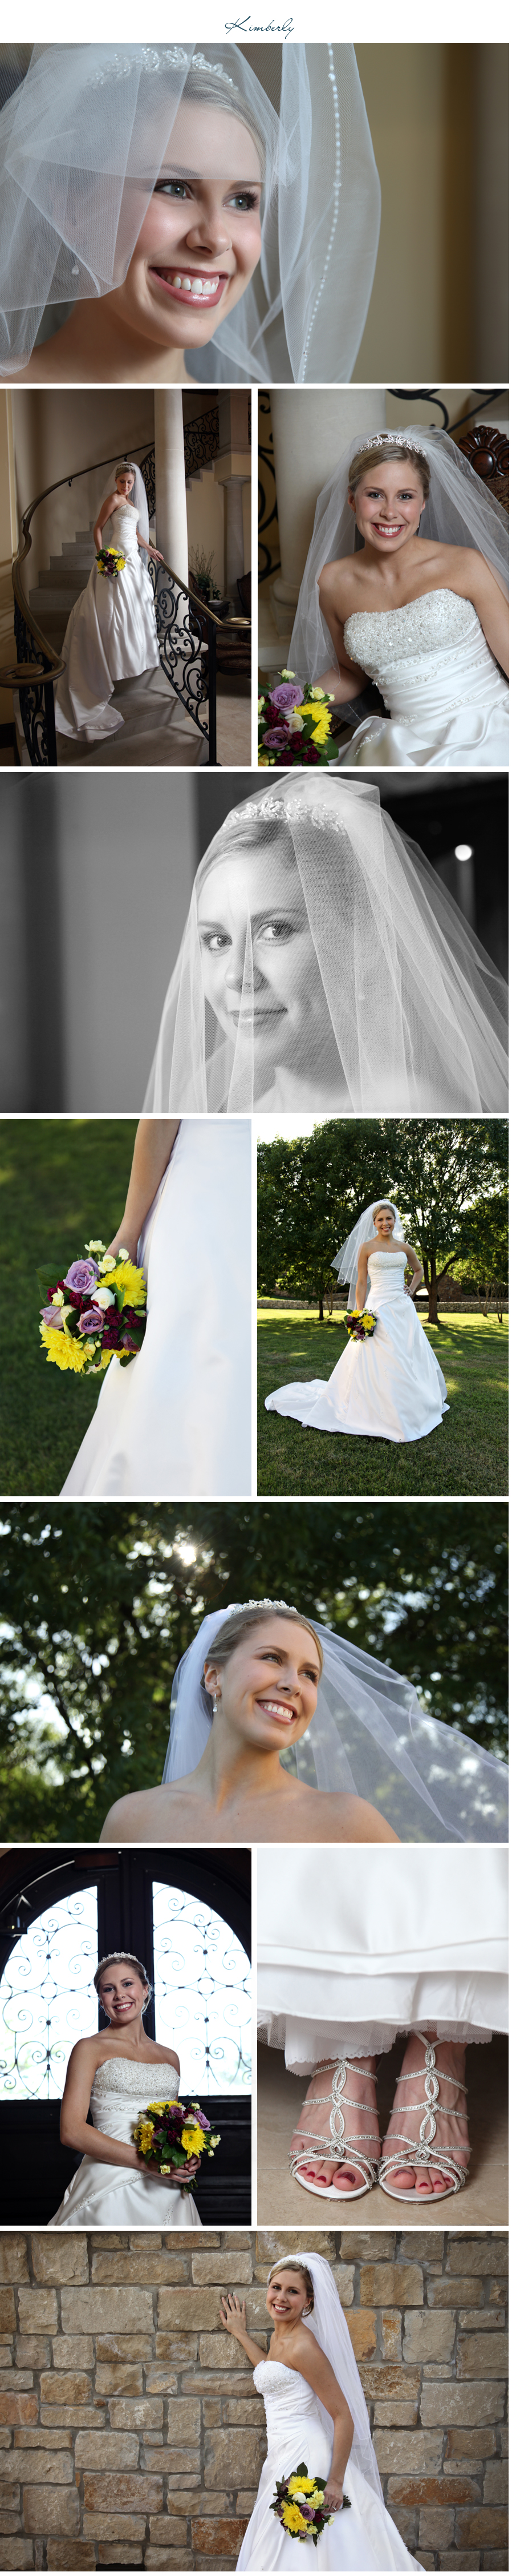 Bridal Session at Adriatica, McKinney, TX Wedding Photography by Phase 3 Photography